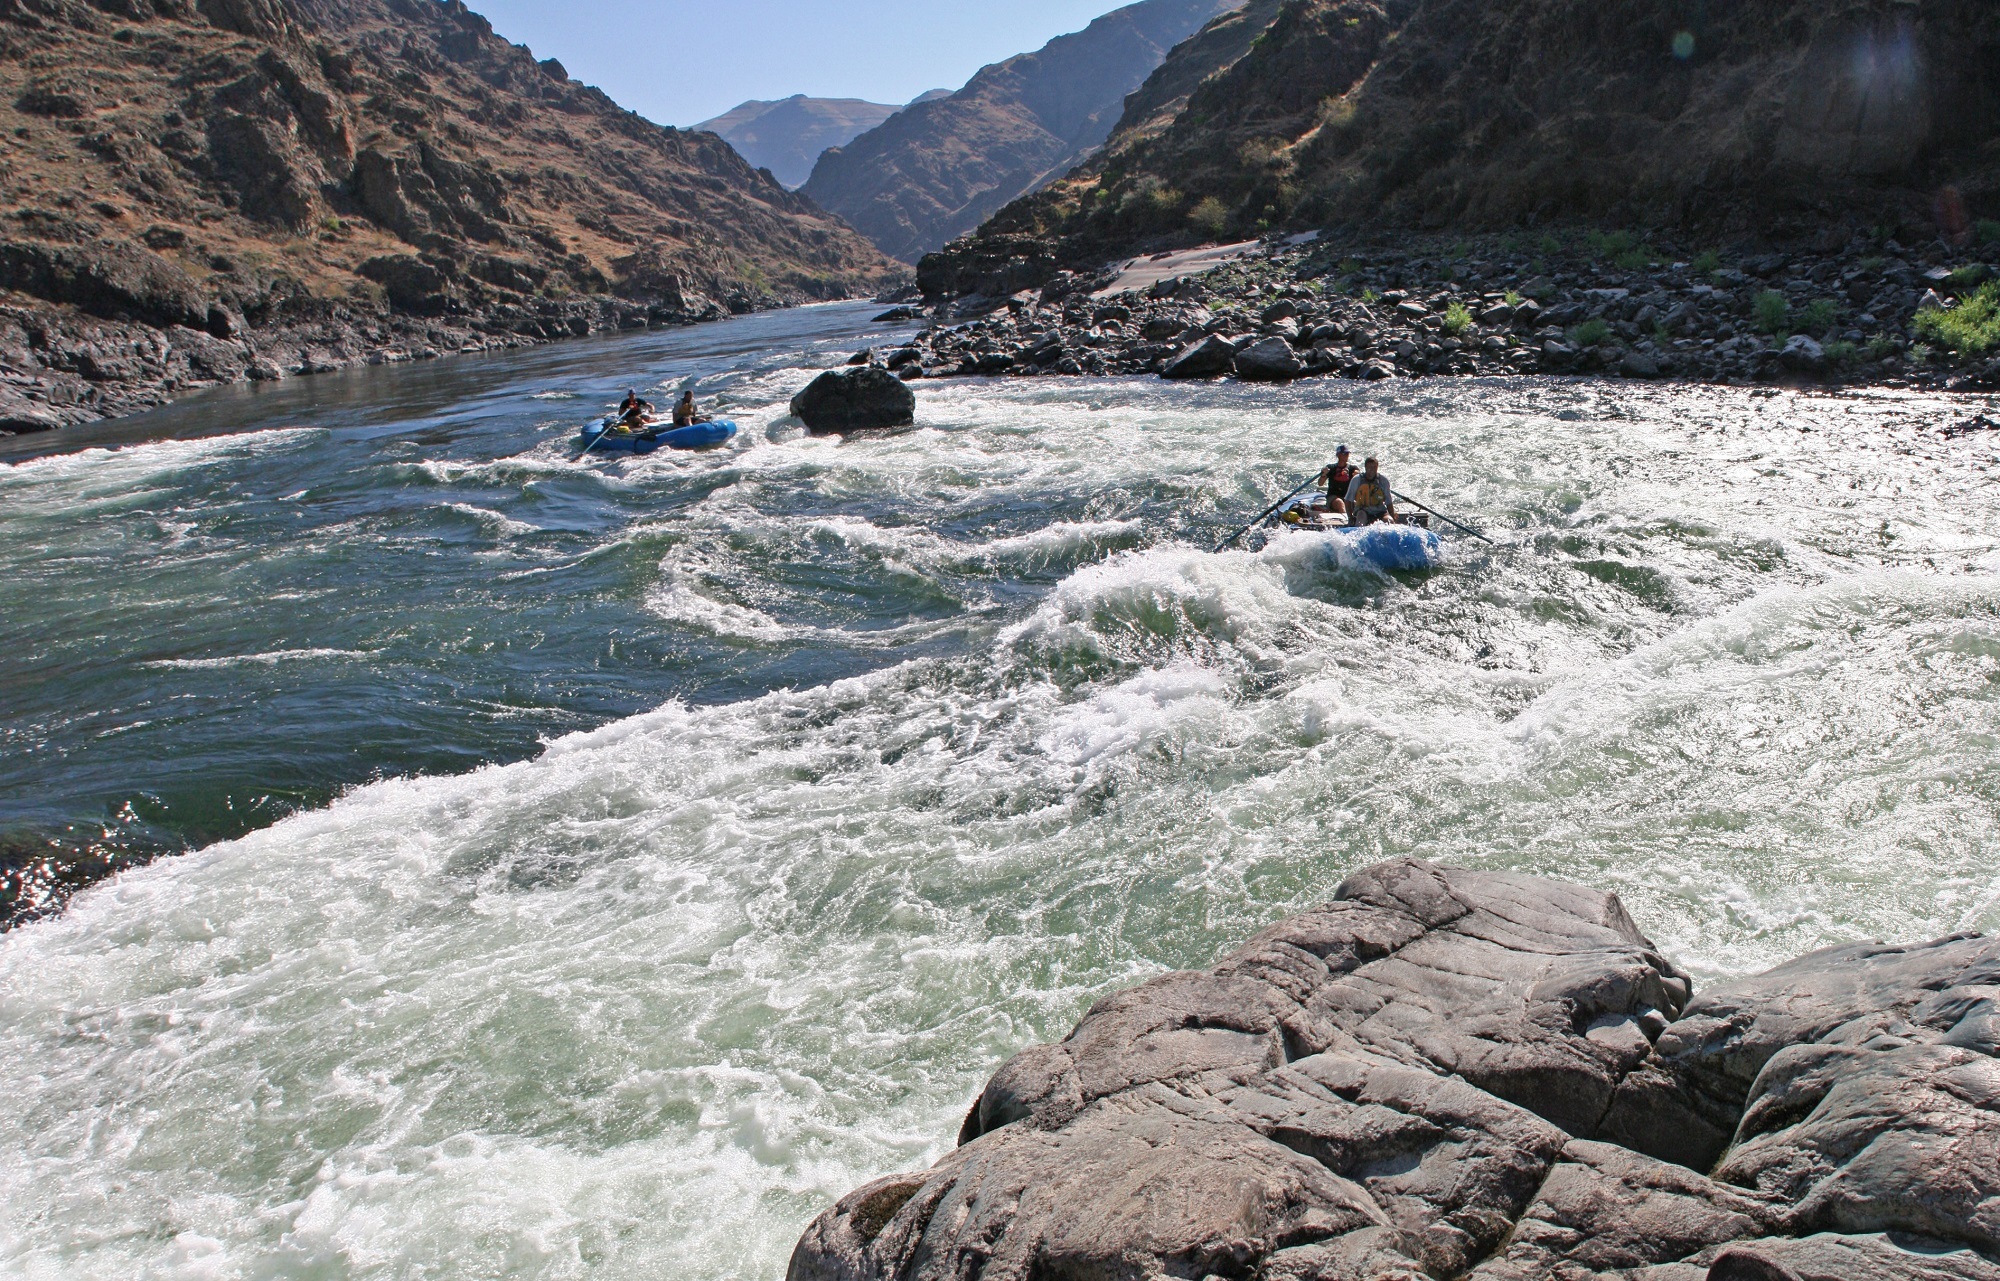 Rafting in the running water photo